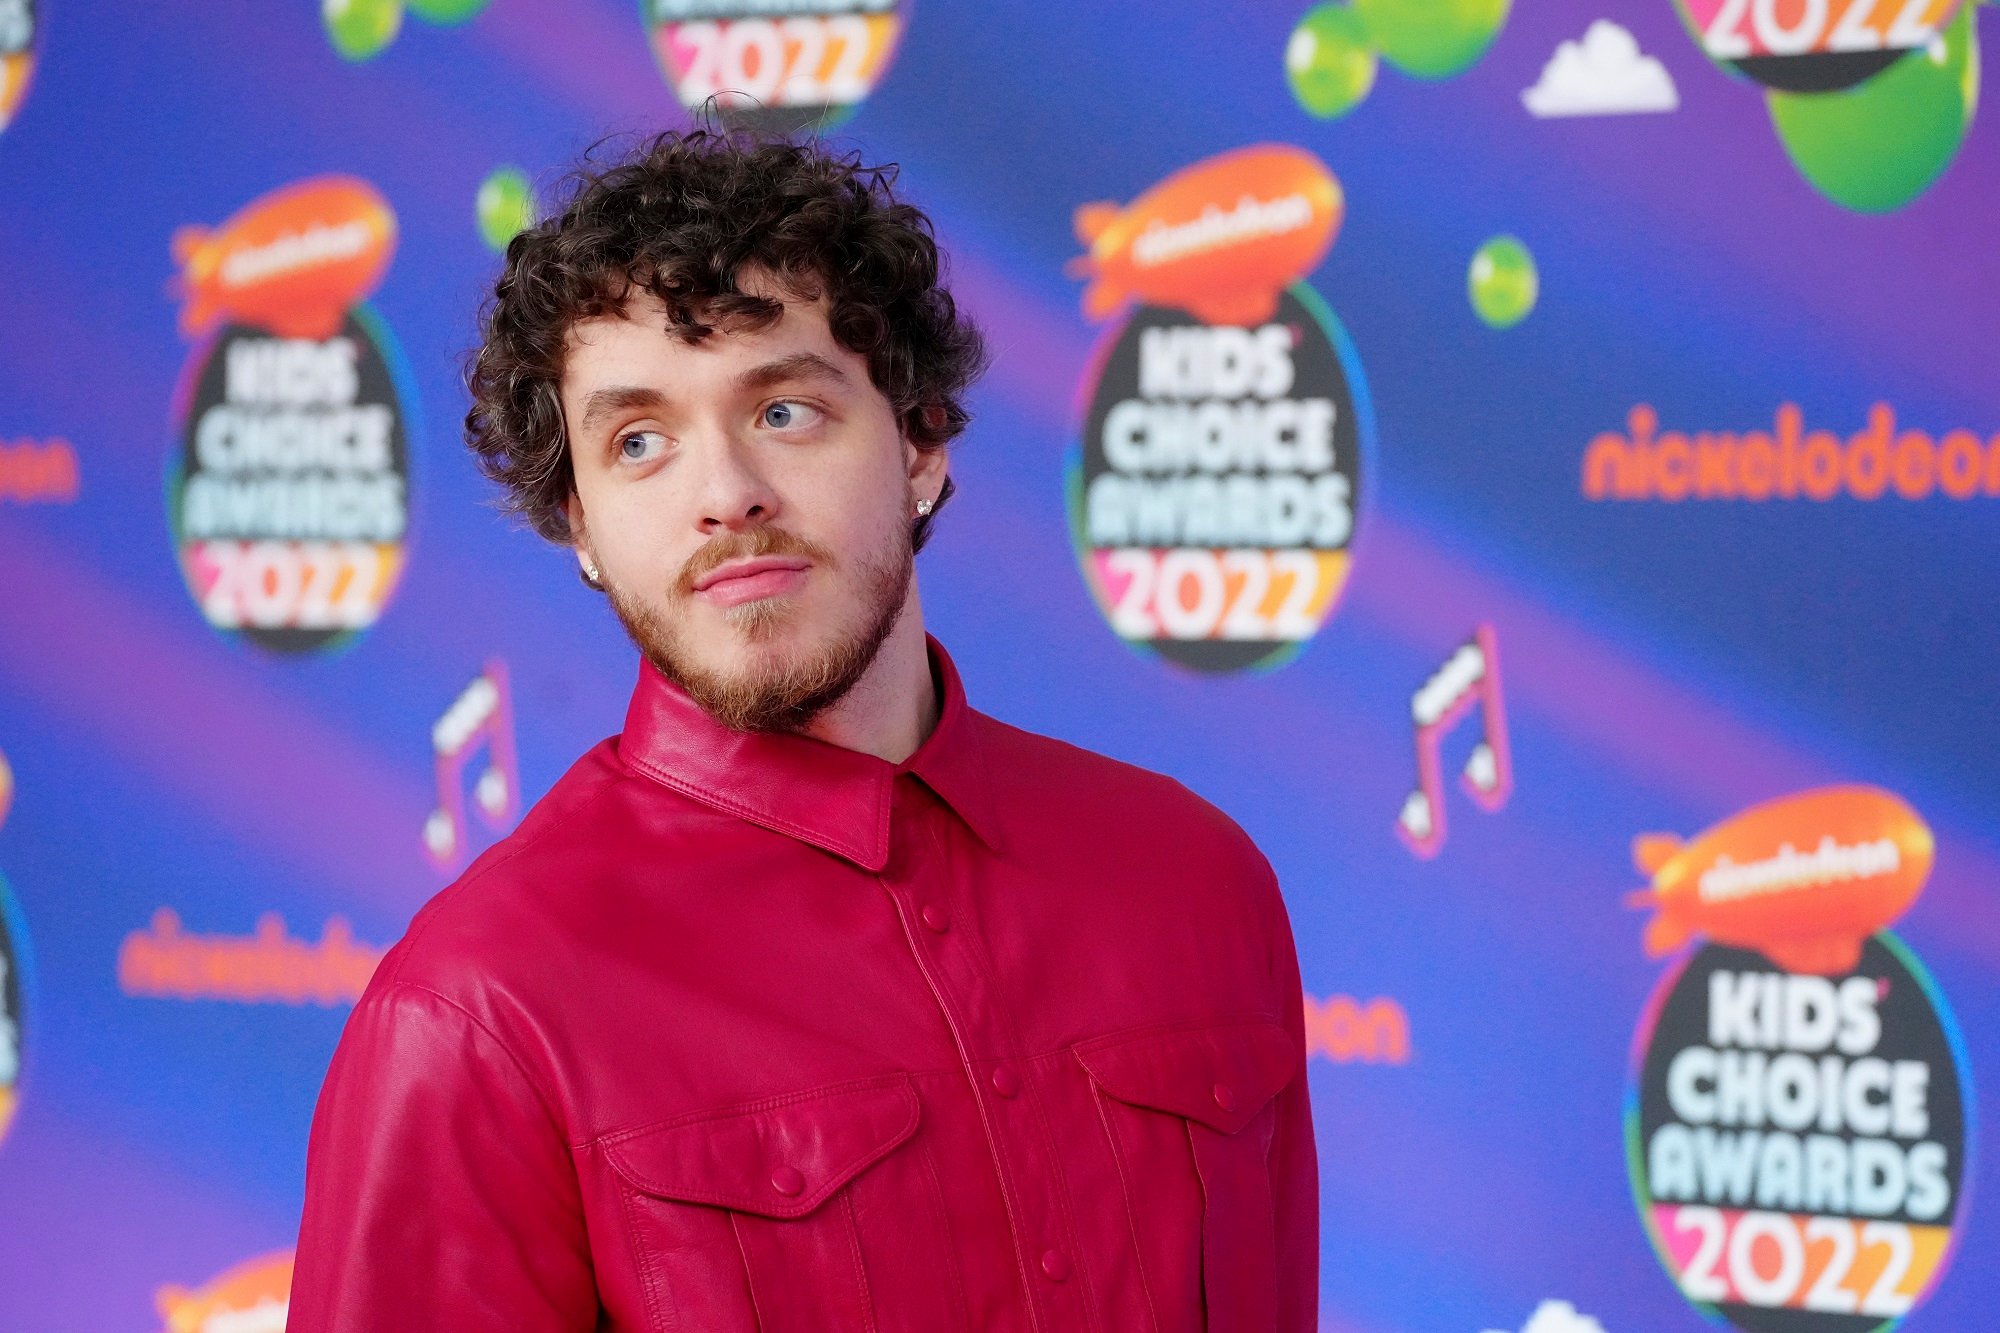 Jack Harlow attends the 2022 Nickelodeon Kid's Choice Awards